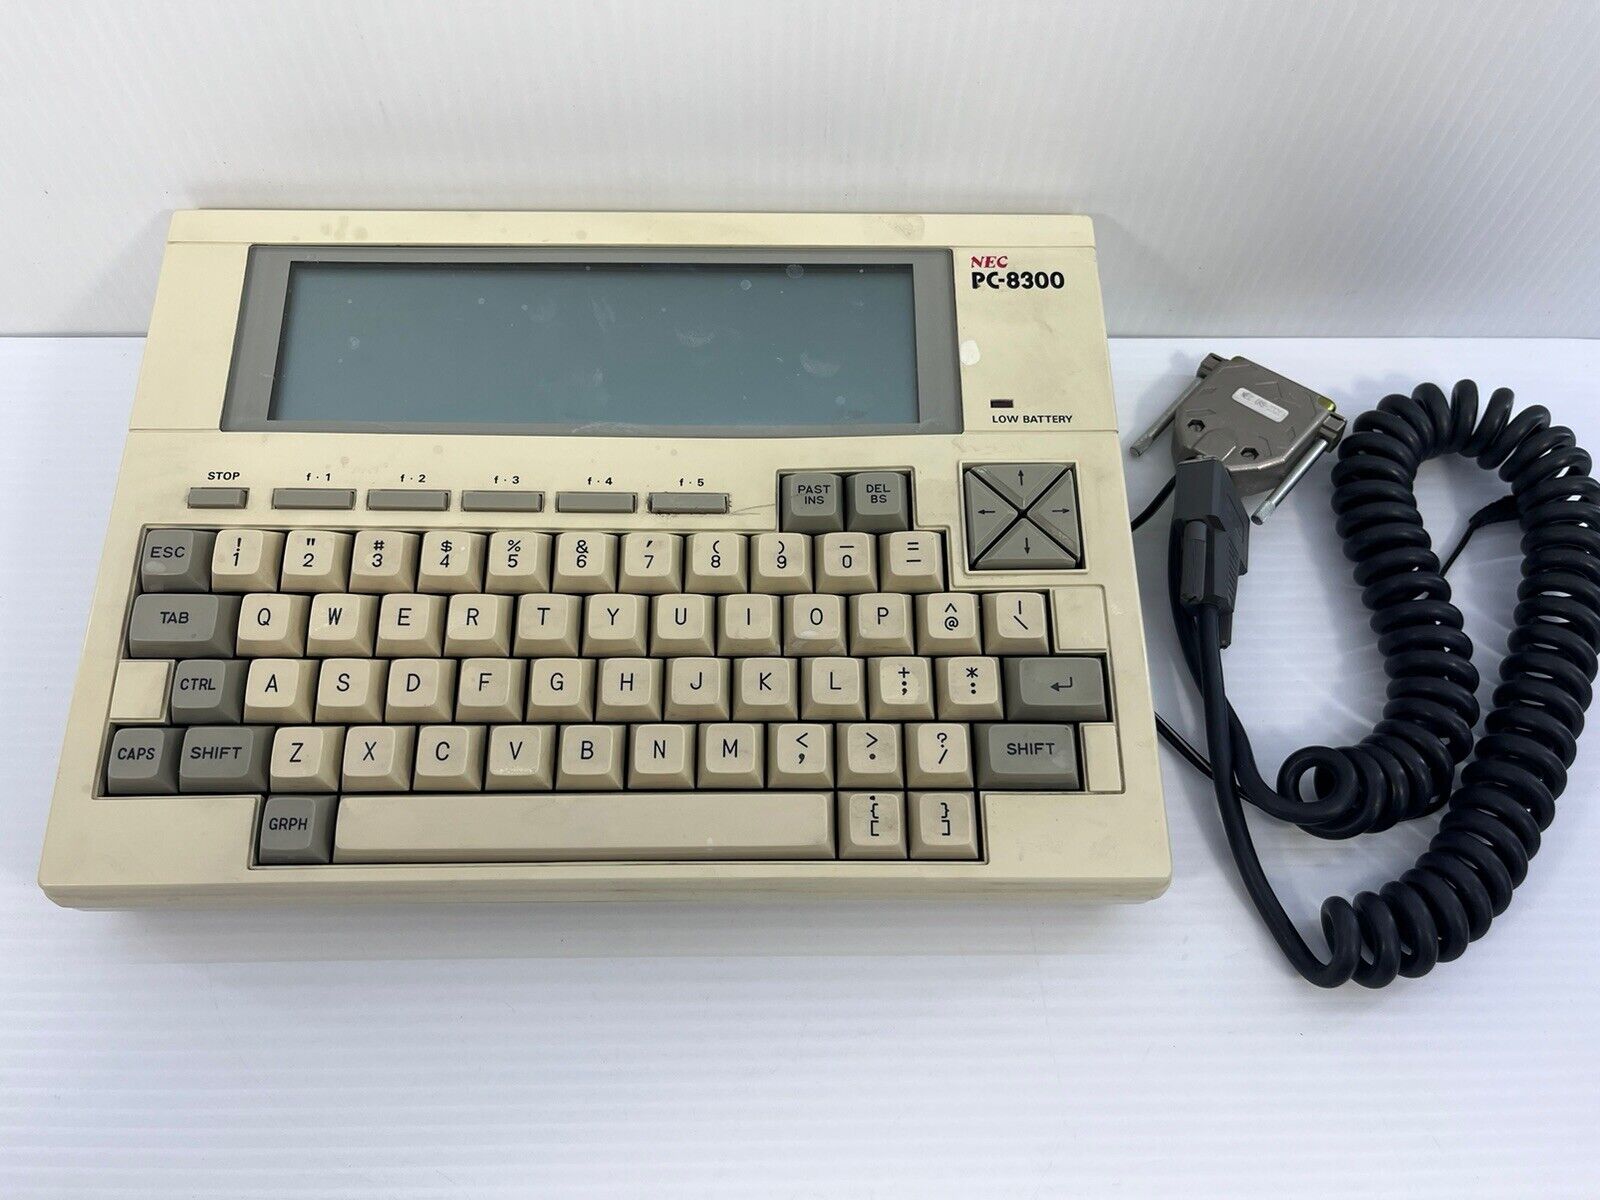 Nec Pc-8300 Vintage Laptop /Micro Computer - For Parts or Repair - READ